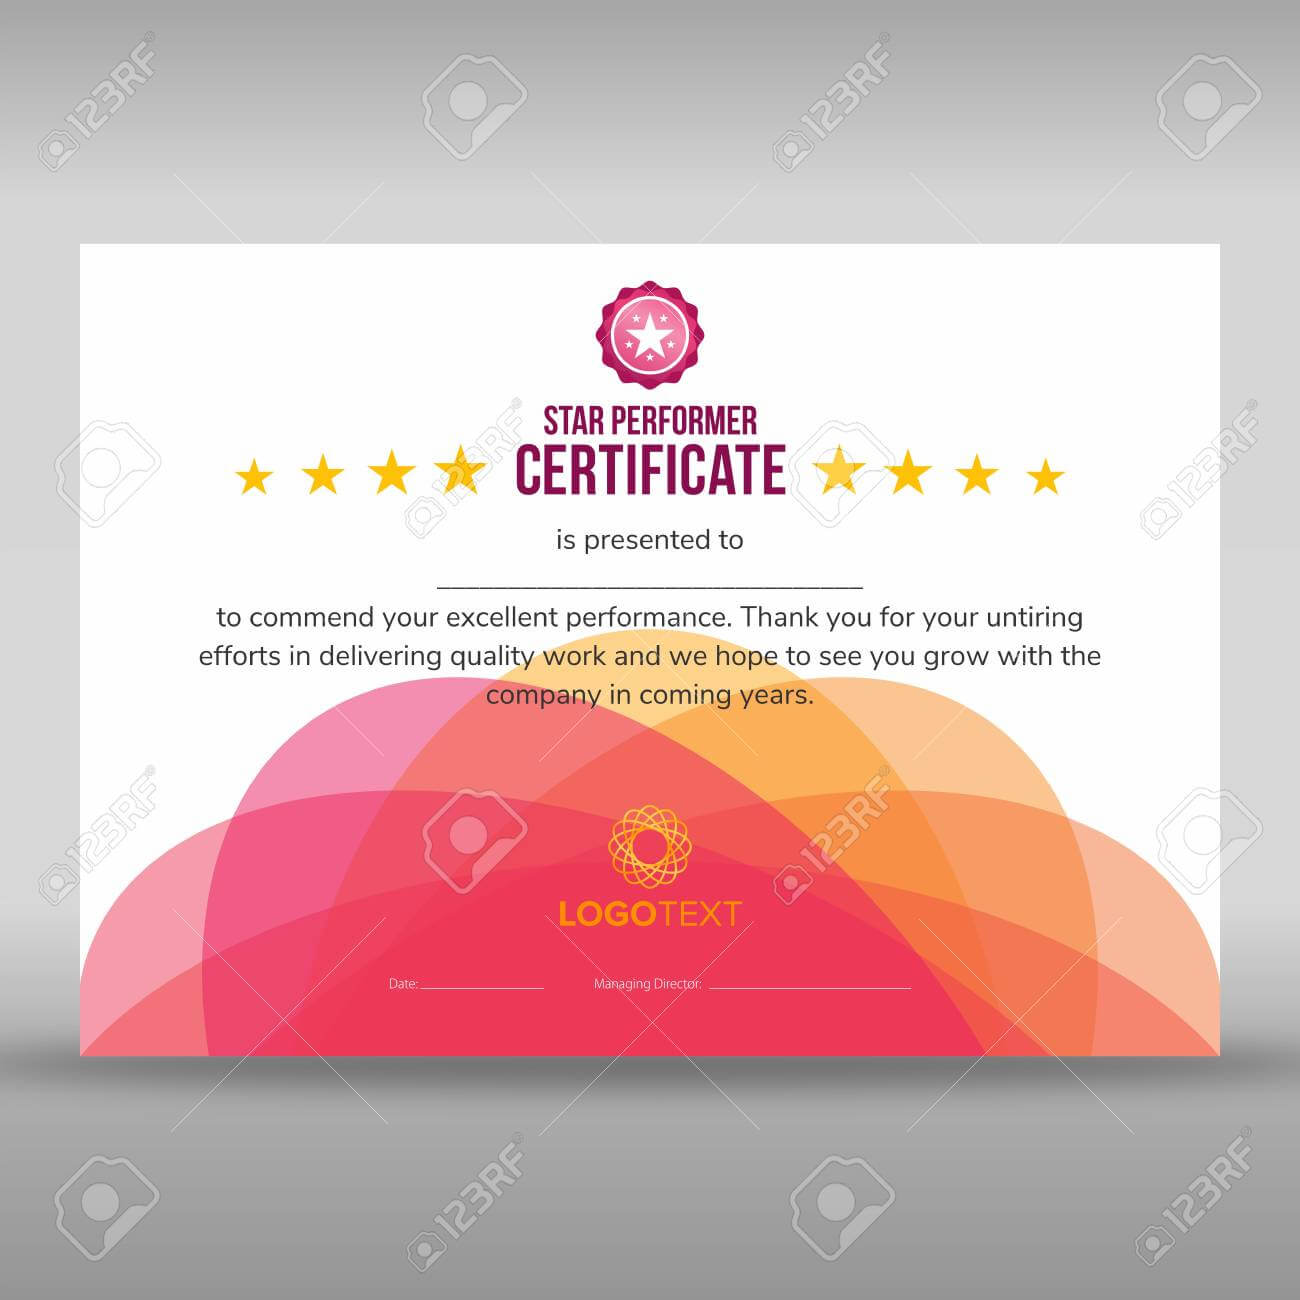 Abstract Creative Pink Star Performer Certificate In Star Performer Certificate Templates